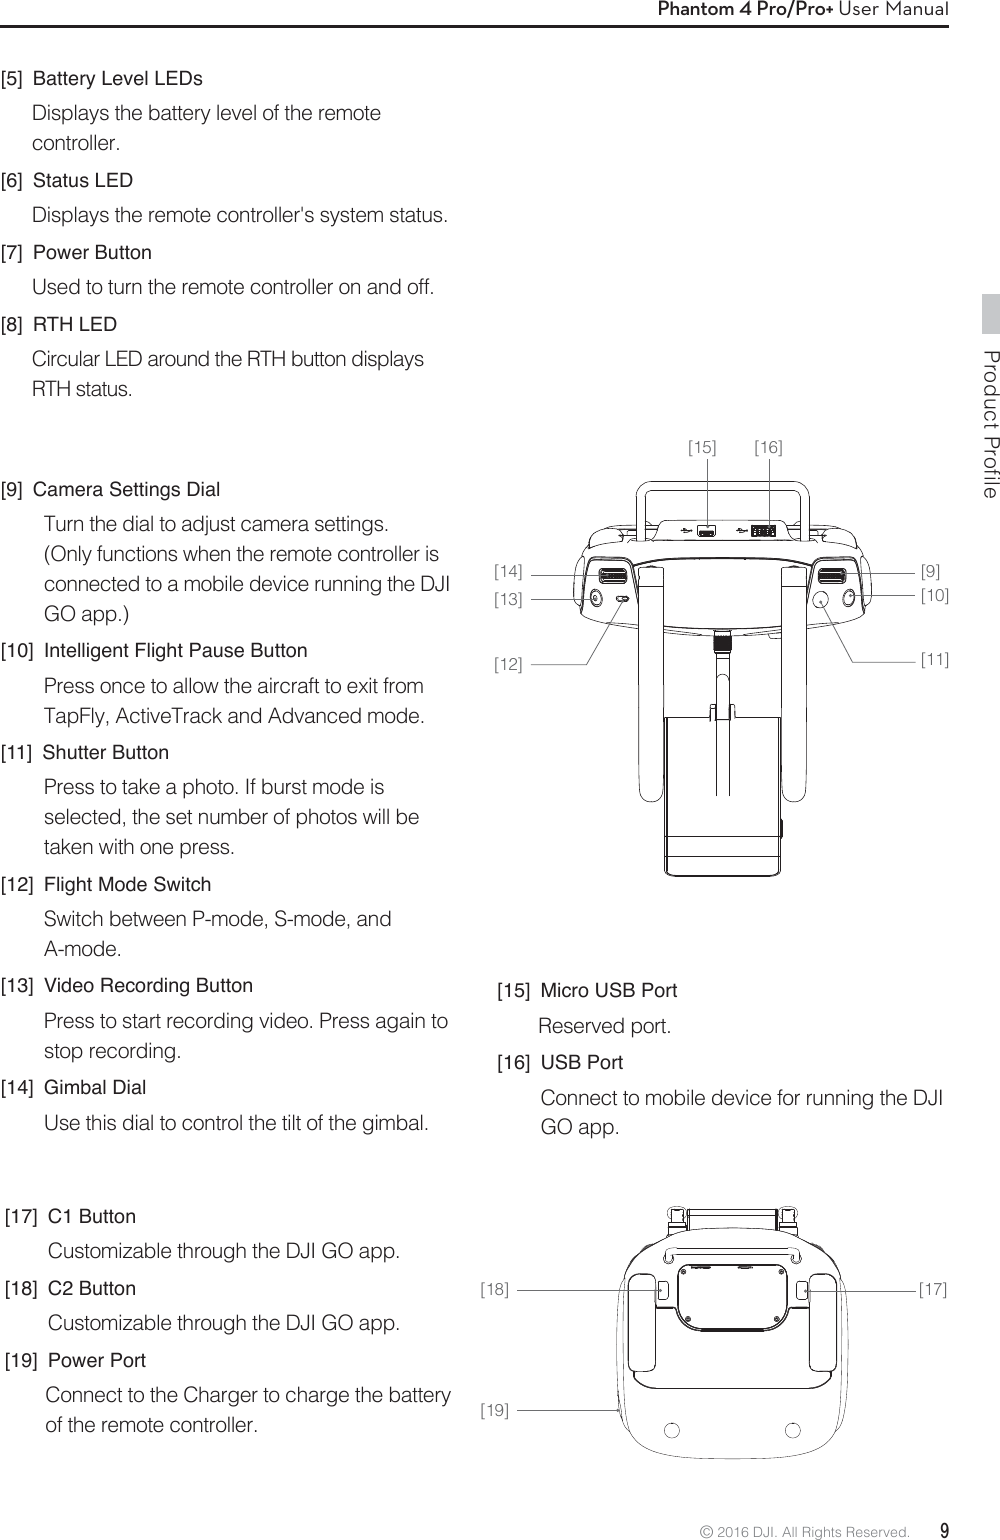 Product Profile© 2016 DJI. All Rights Reserved.  9Phantom 4 Pro/Pro+ User Manual[5]  Battery Level LEDsDisplays the battery level of the remote controller. [6] Status LEDDisplays the remote controller&apos;s system status. [7] Power ButtonUsed to turn the remote controller on and off.[8] RTH LED Circular LED around the RTH button displays RTH status. [9]  Camera Settings Dial Turn the dial to adjust camera settings. (Only functions when the remote controller is connected to a mobile device running the DJI GO app.)[10]  Intelligent Flight Pause Button Press once to allow the aircraft to exit from TapFly, ActiveTrack and Advanced mode. [11]  Shutter Button  Press to take a photo. If burst mode is selected, the set number of photos will be taken with one press.[12]  Flight Mode SwitchSwitch between P-mode, S-mode, and A-mode.[13]  Video Recording ButtonPress to start recording video. Press again to stop recording.[14] Gimbal DialUse this dial to control the tilt of the gimbal. [15]  Micro USB PortReserved port.[16]  USB PortConnect to mobile device for running the DJI GO app. [17] C1 ButtonCustomizable through the DJI GO app.[18] C2 ButtonCustomizable through the DJI GO app.[19] Power PortConnect to the Charger to charge the battery of the remote controller. [10][11][15] [16][9][12][13][14][17][19][18]